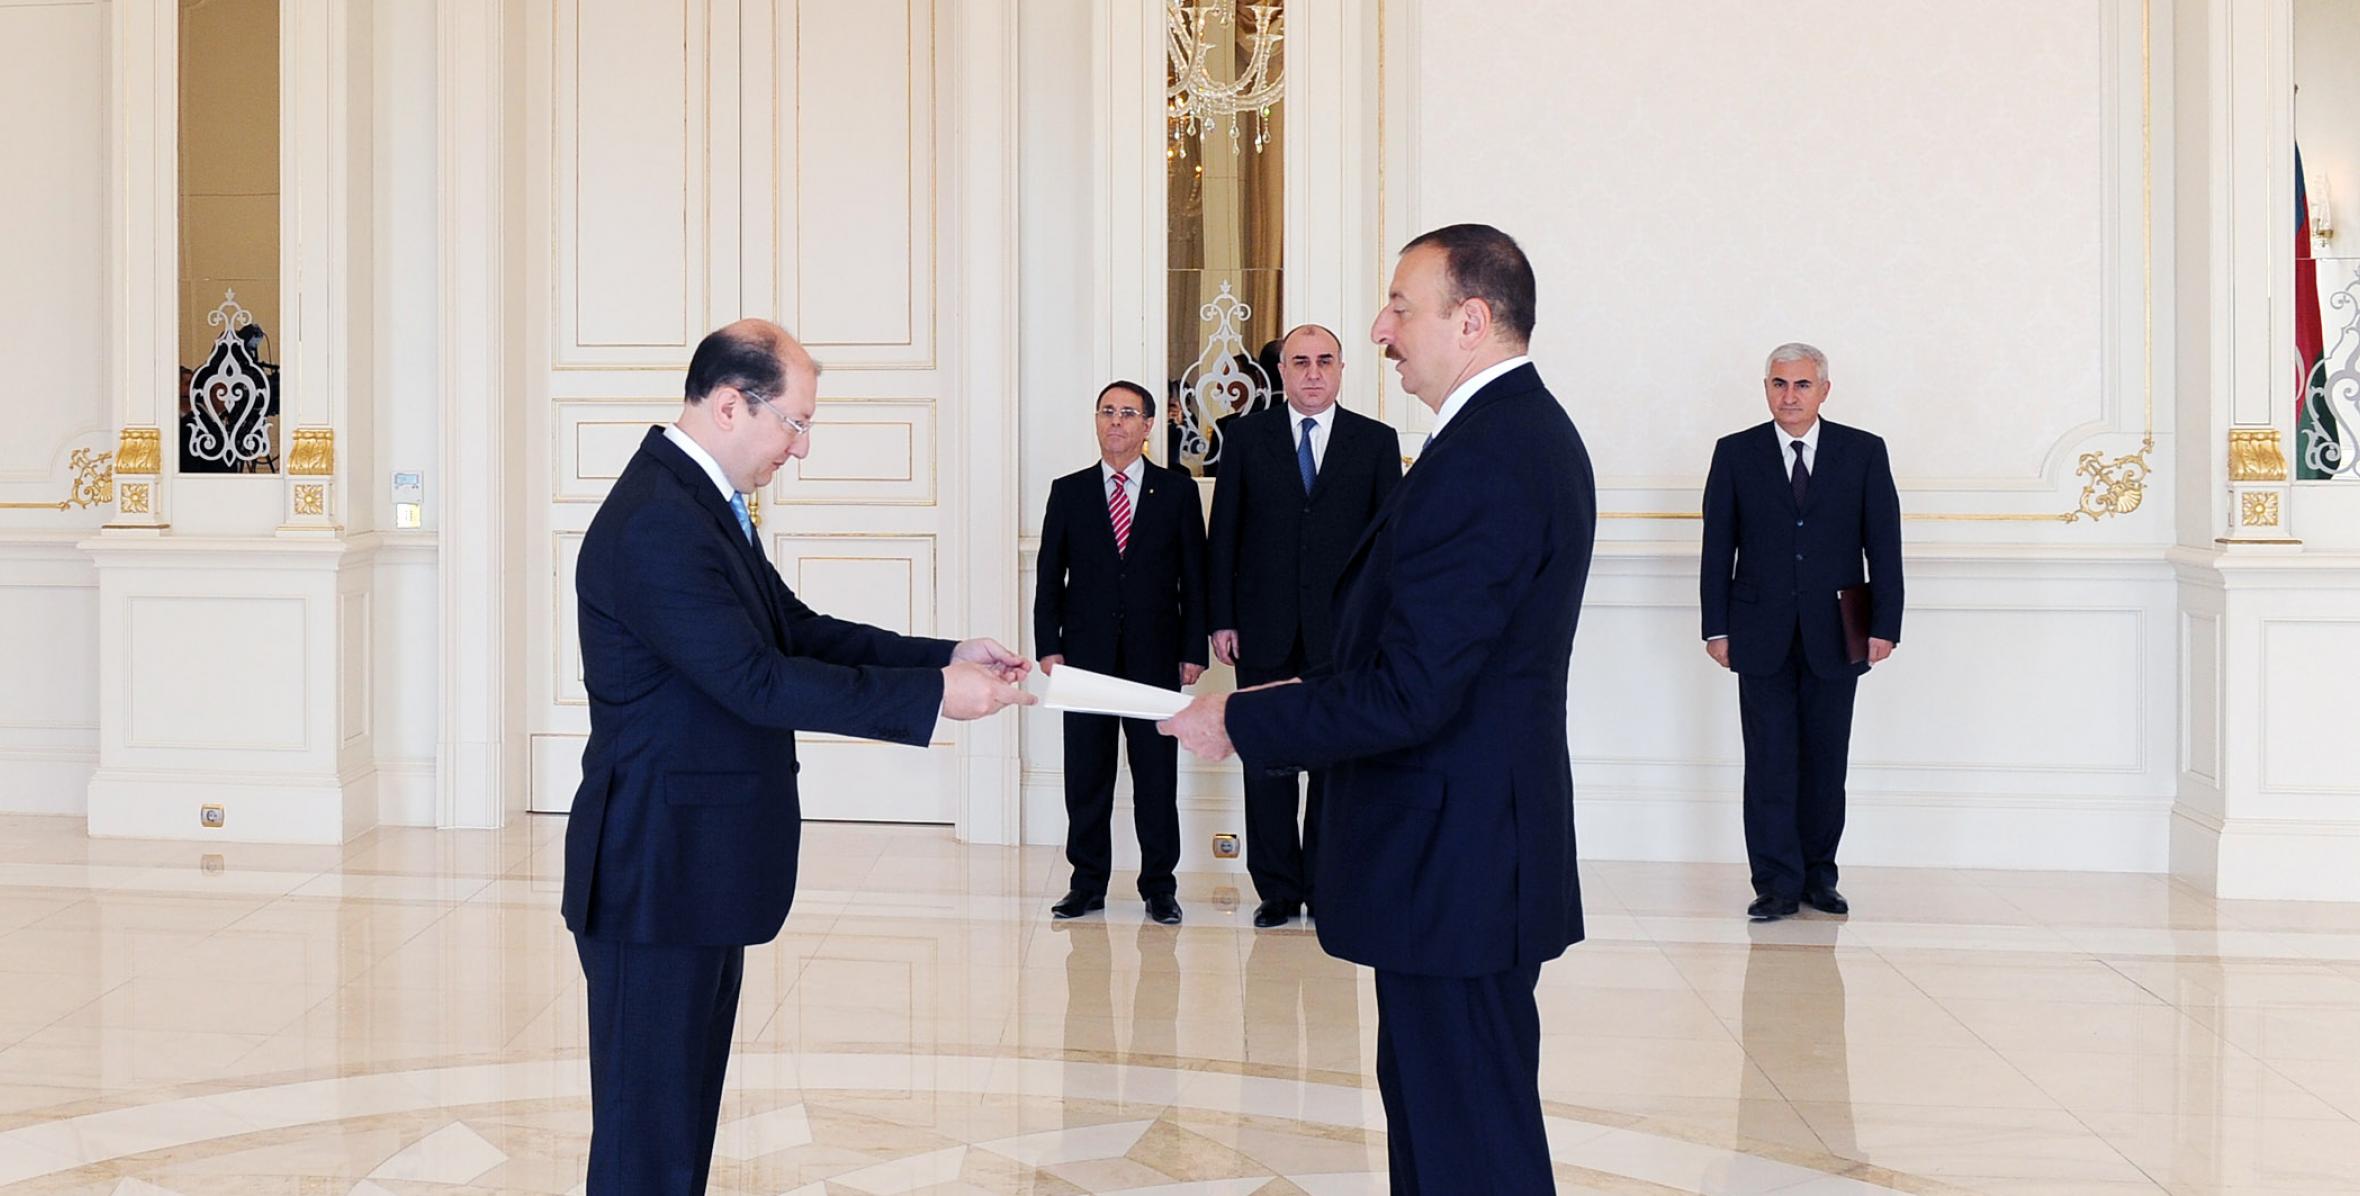 Ilham Aliyev accepted the credentials of the newly-appointed Ambassador of Uzbekistan to Azerbaijan